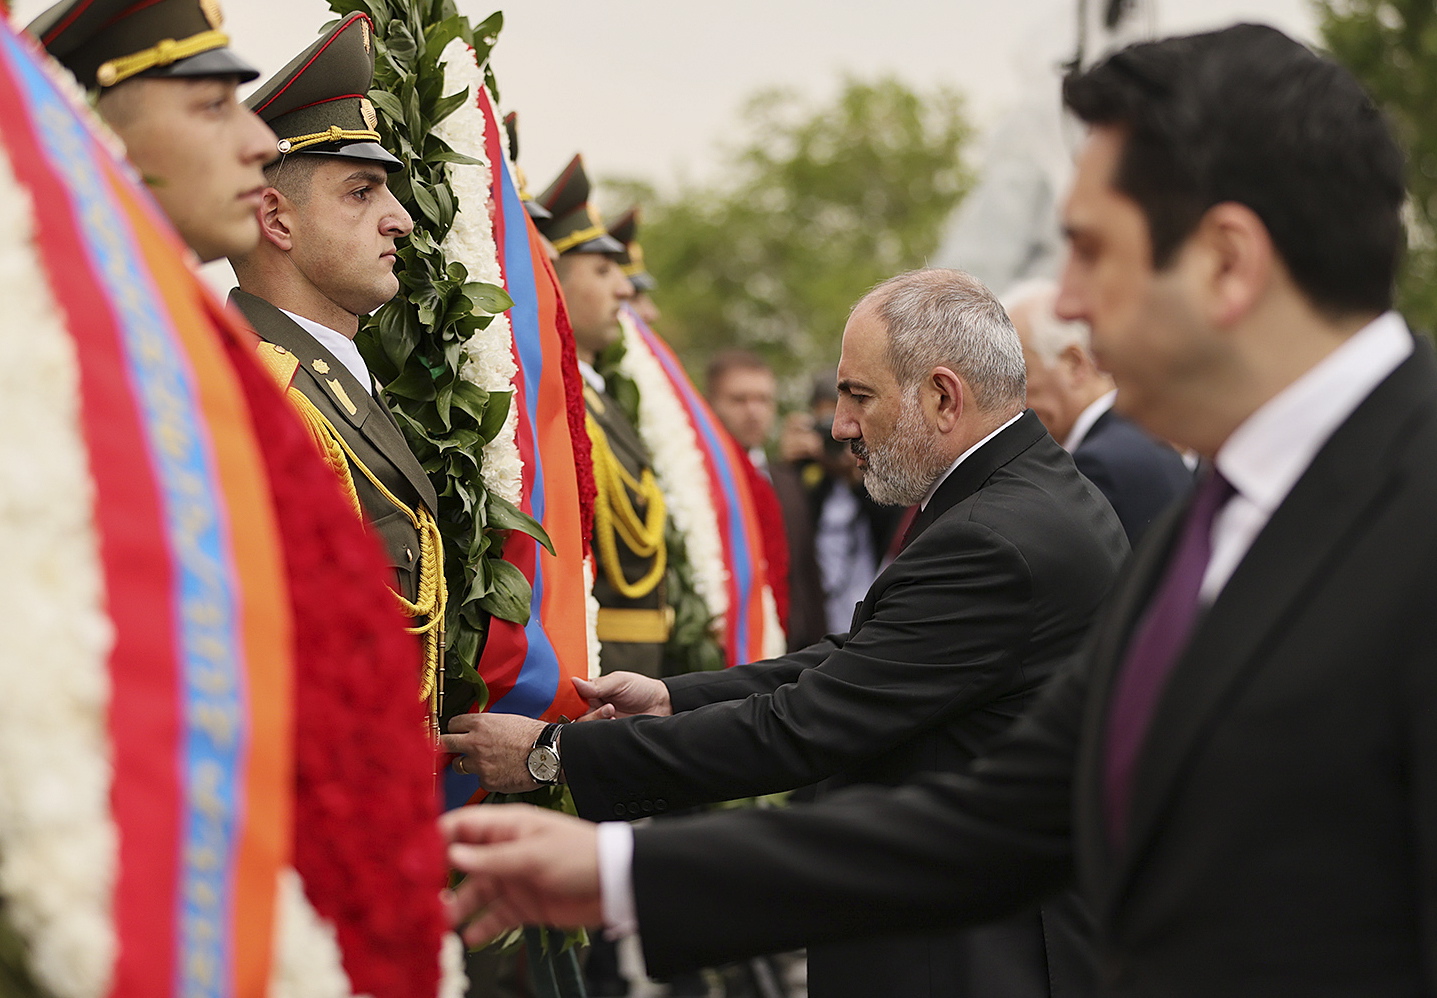 epa10589193 A handout photo made available by the Armenian Prime Minister press service shows Armenian Prime Minister Nikol Pashinyan (C) laying a wreath to commemorate the victims of the Armenian Genocide at the Tsitsernakaberd Armenian Genocide Memorial complex in Yerevan, Armenia, 24 April 2023. Armenia marks the 108th anniversary of the Armenian Genocide in which some 1.5 million Armenians were killed in 1915.  EPA/ARMENIAN PRIME MINISTER PRESS SERVICE HANDOUT  HANDOUT EDITORIAL USE ONLY/NO SALES